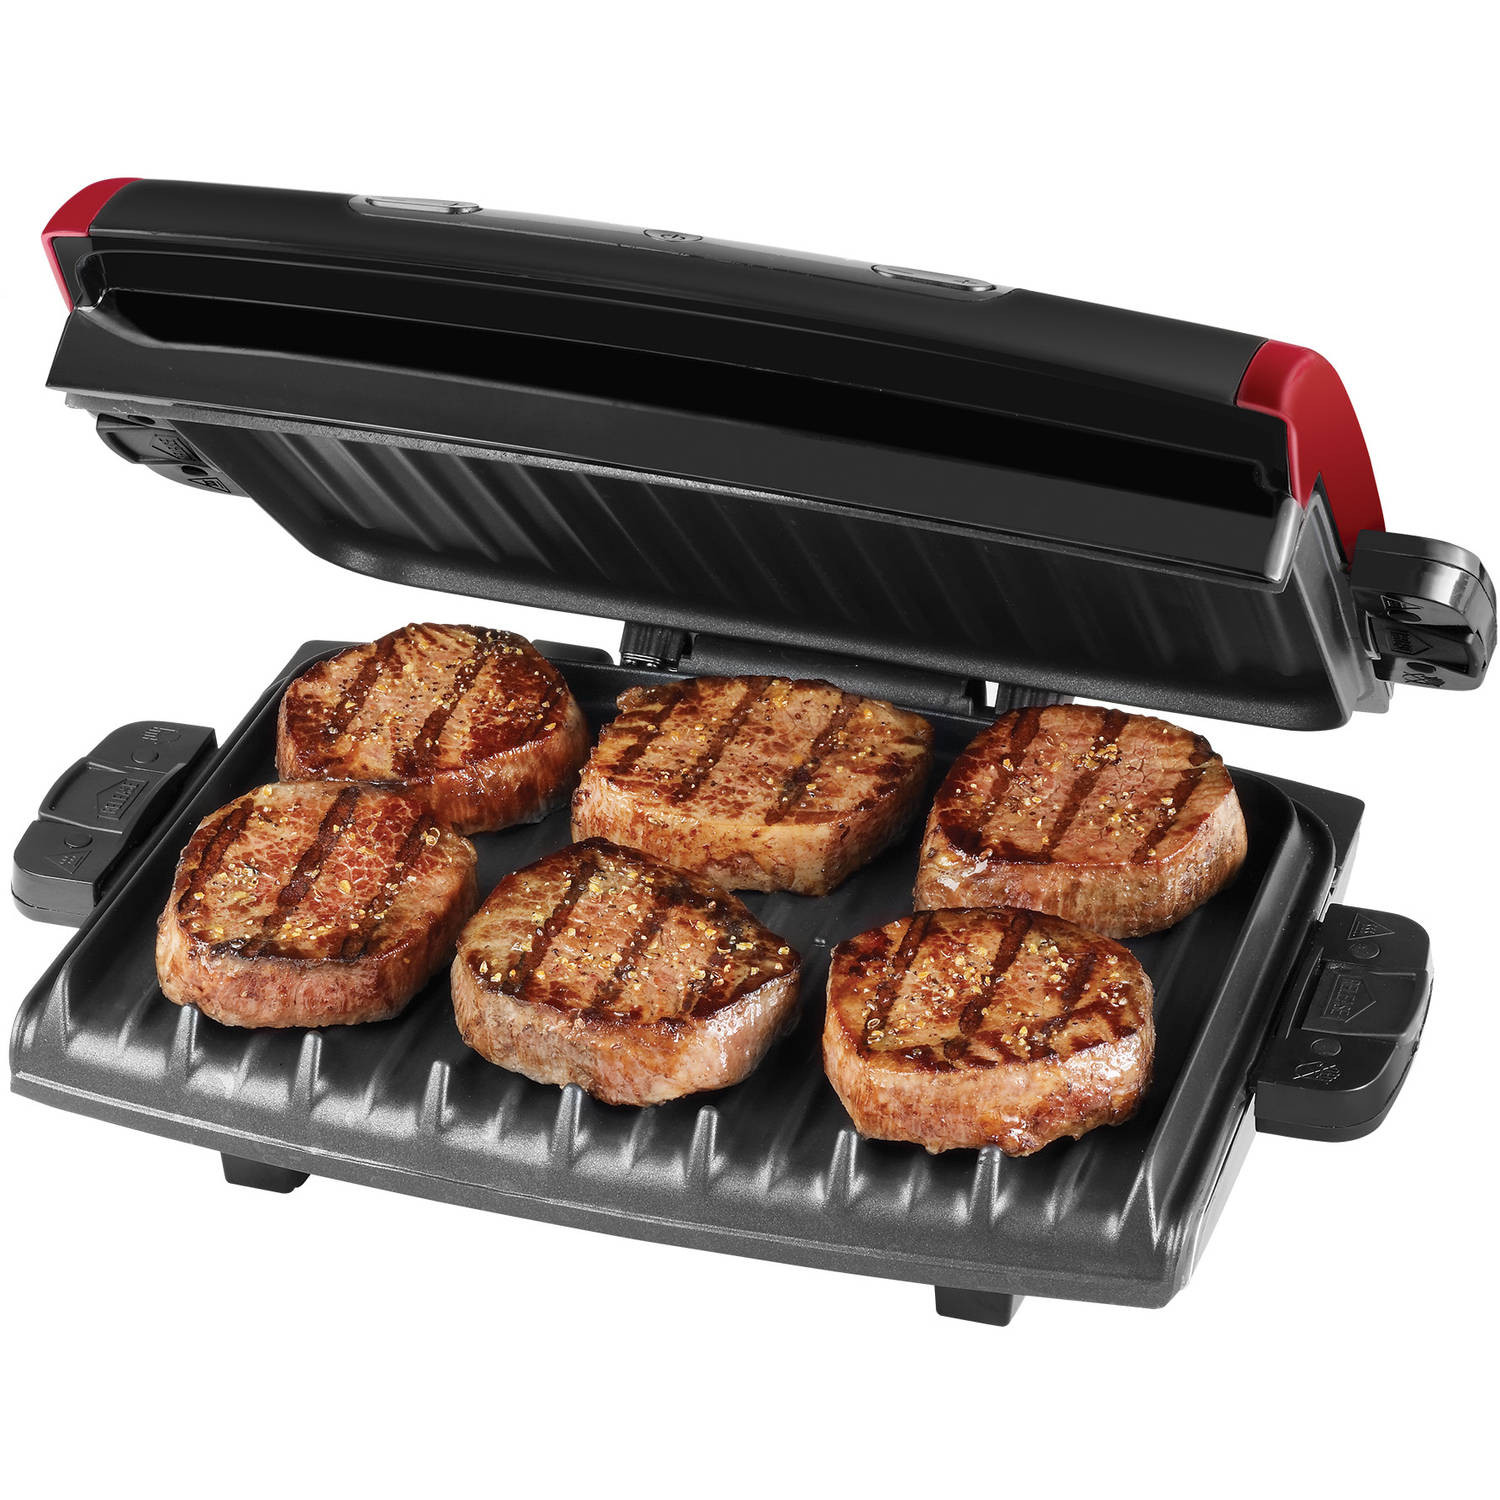 George Foreman Grill Hot Dogs
 George Foreman 6 Serving Digital Timer Temp Removable